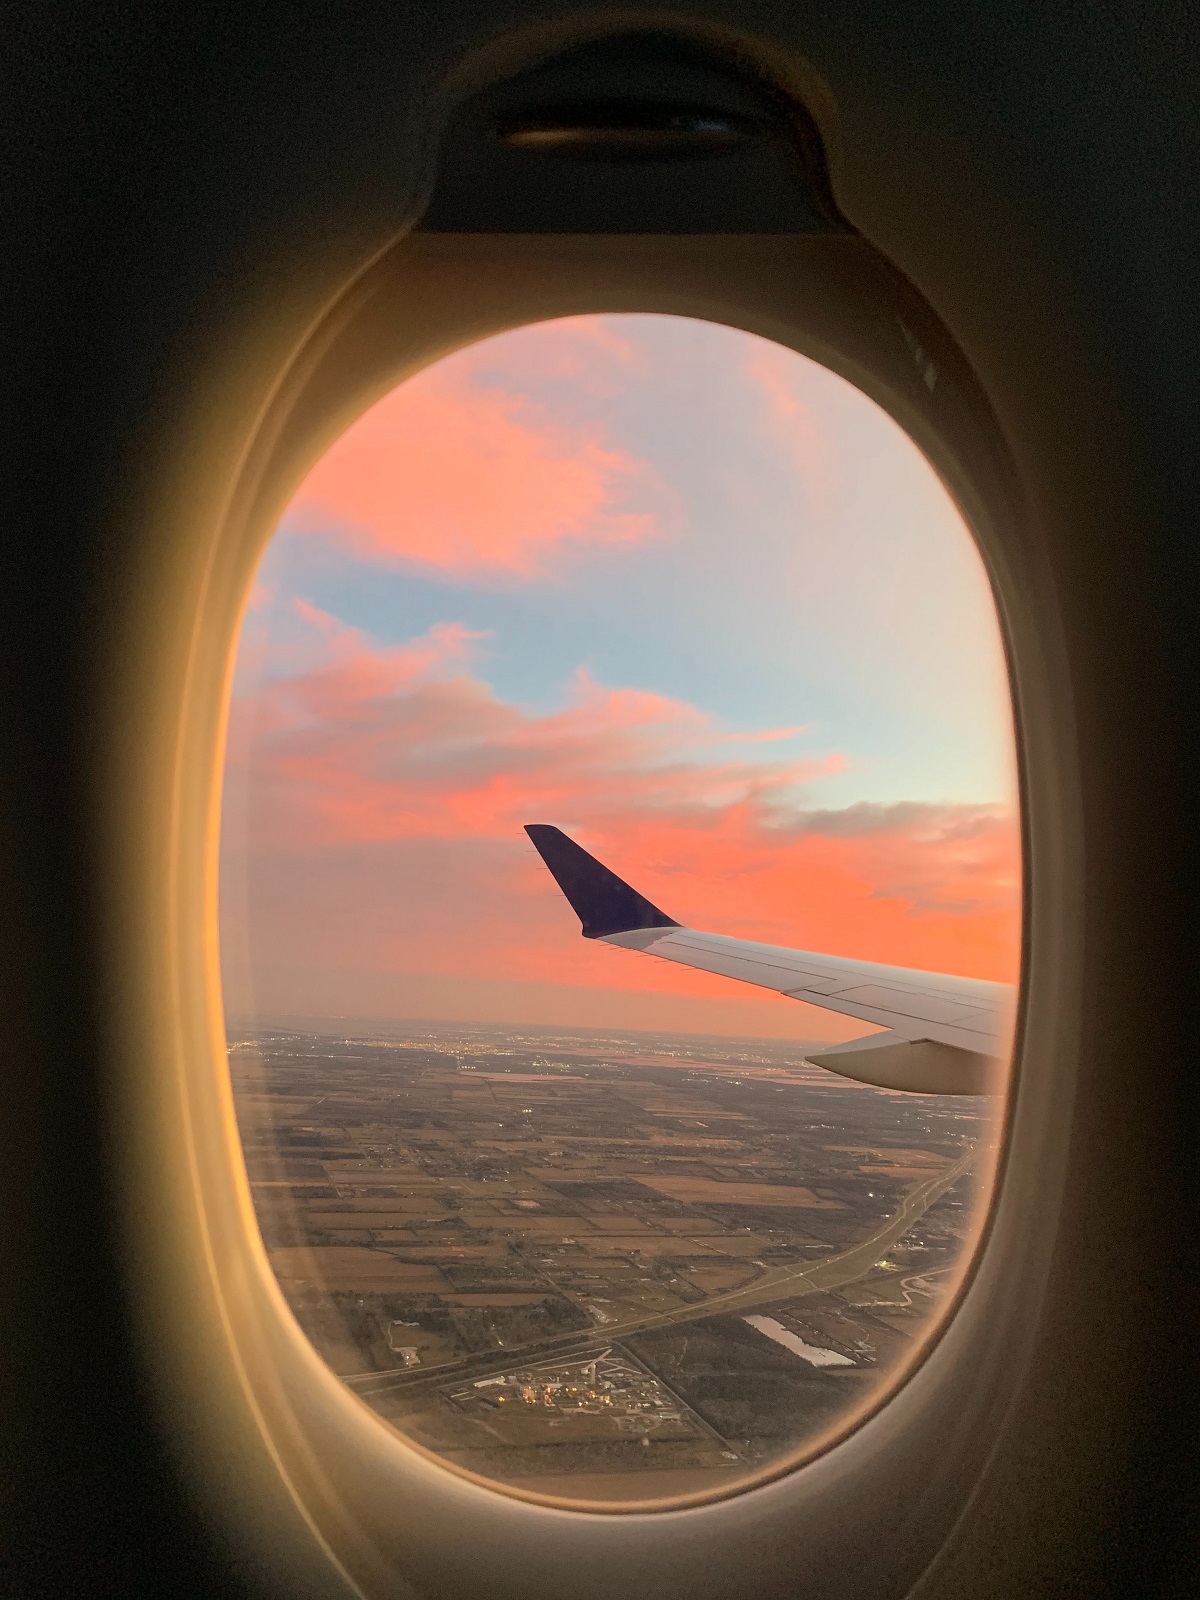 View of ground below from a seat on an airplane by a window